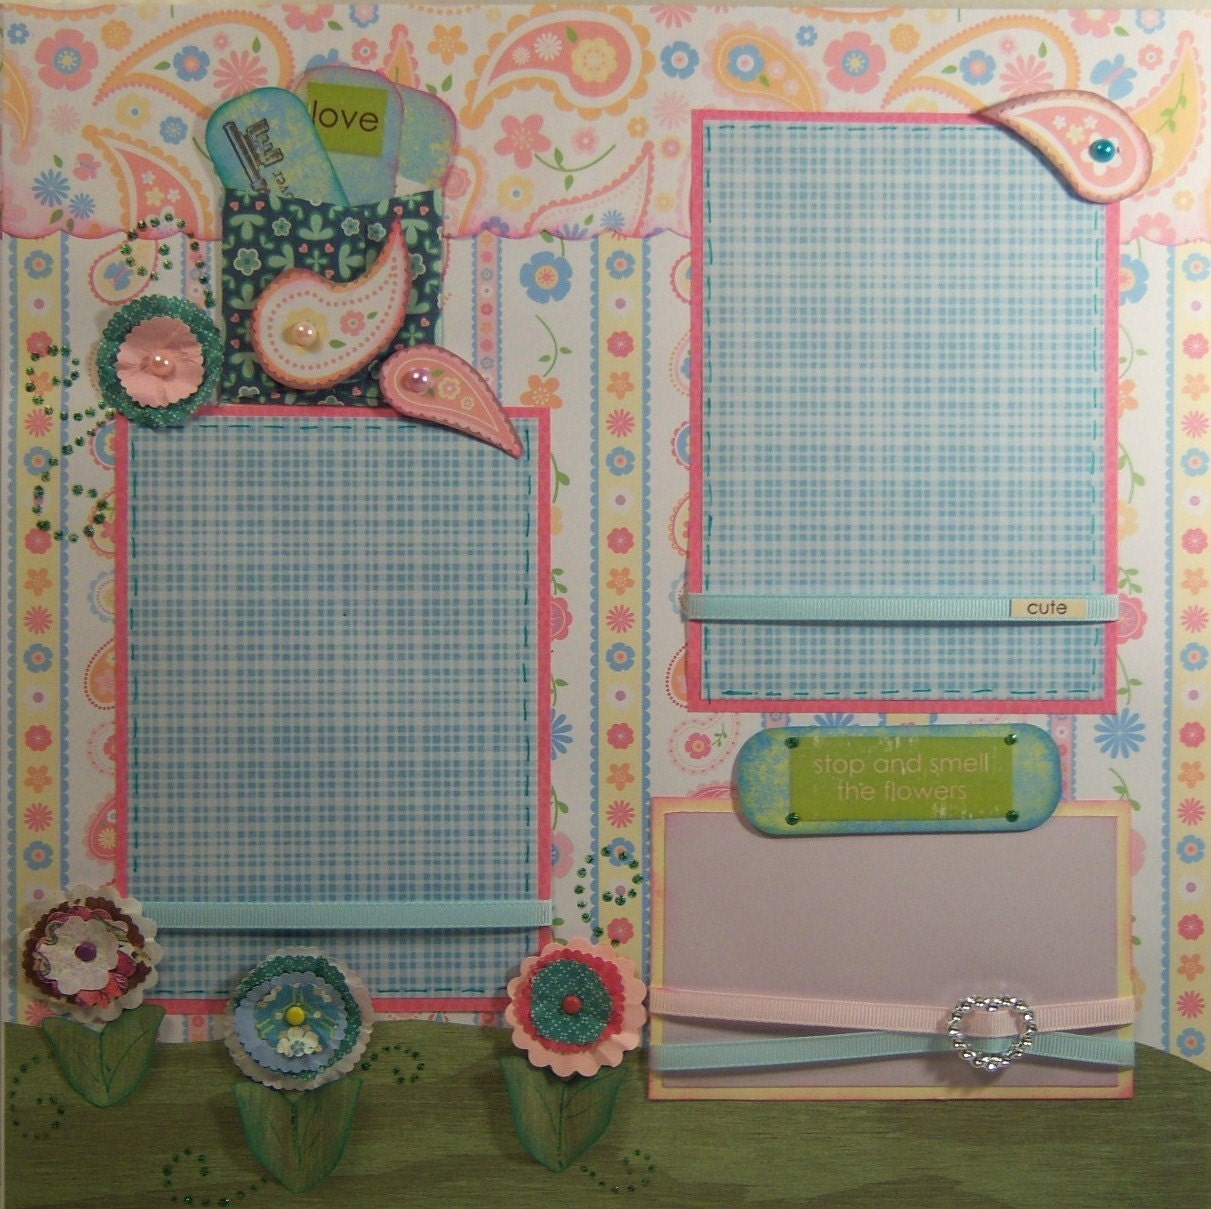 Sweet Girl holding a Bunny Paper Pieced Double Page Layout for Spring or Easter too